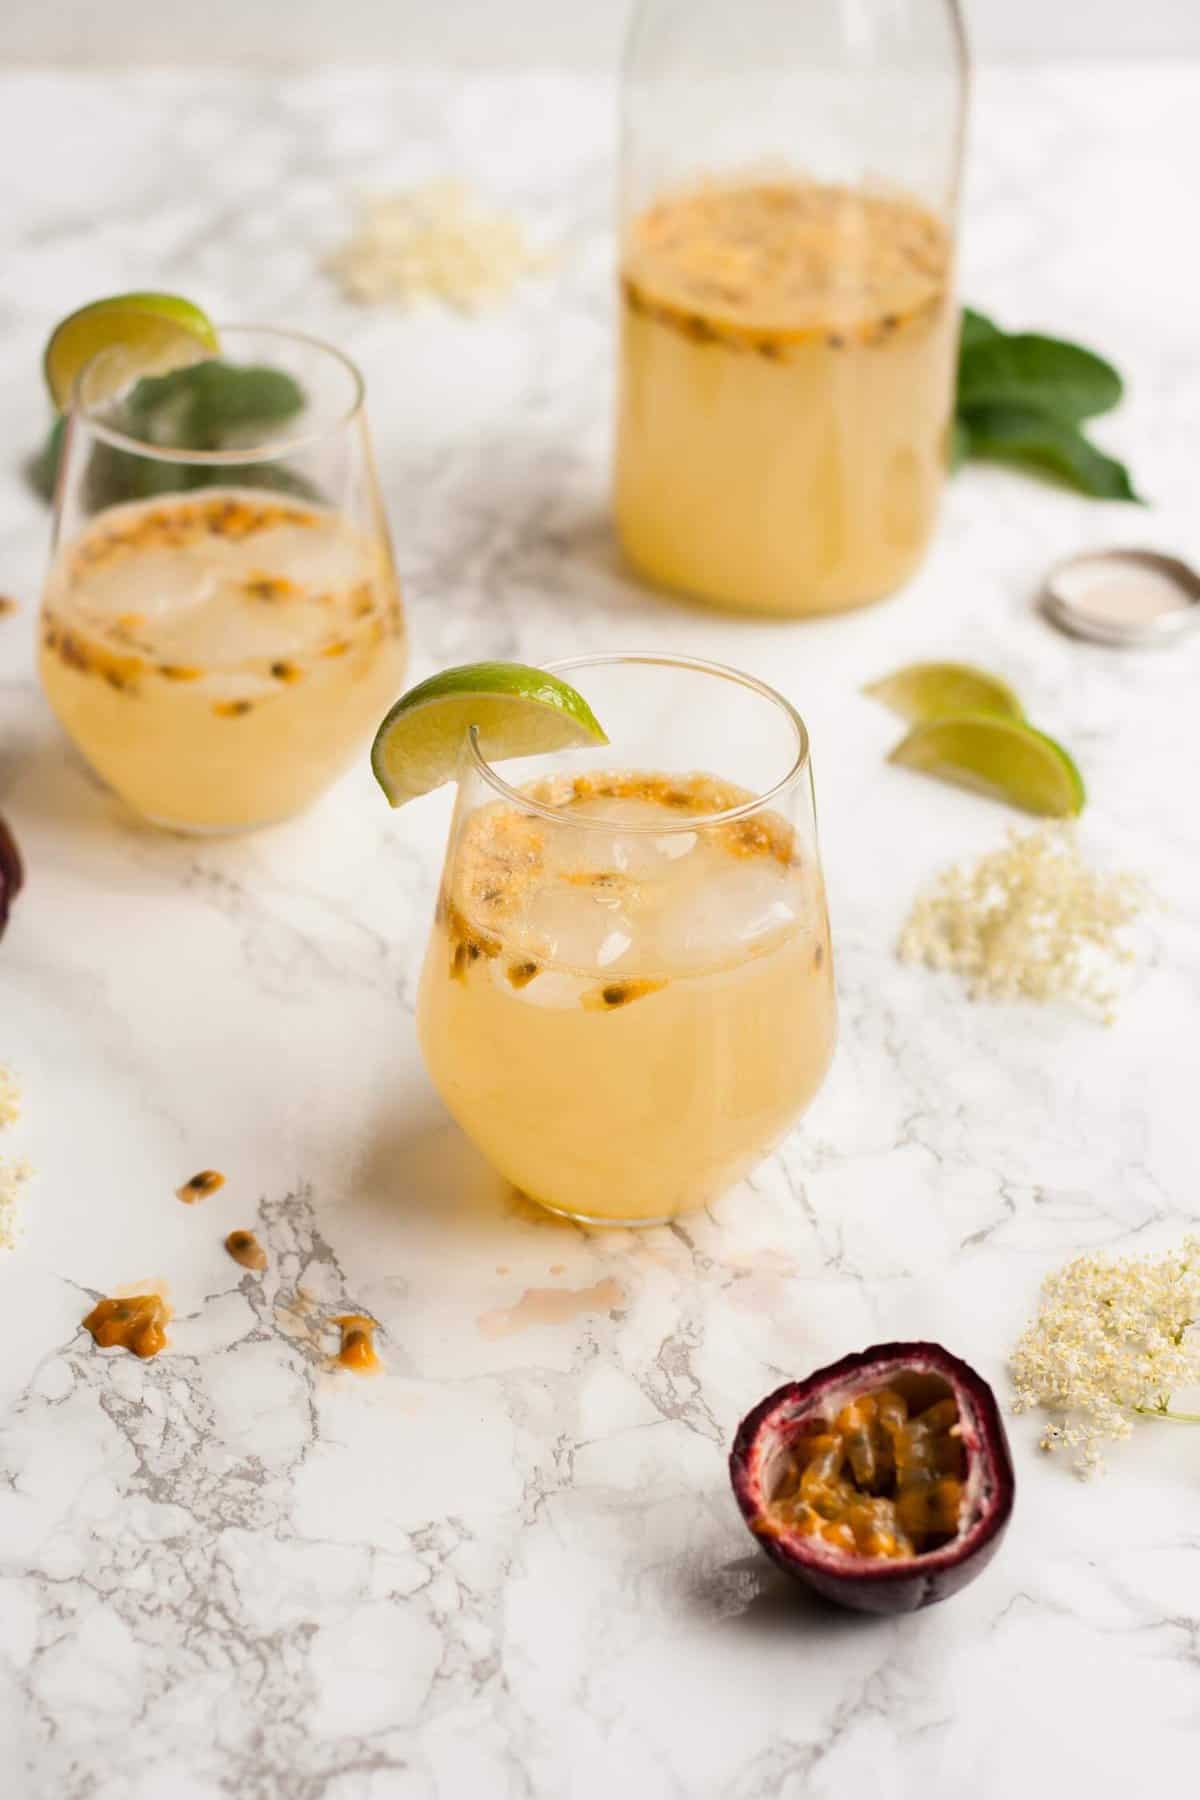 Multiple glasses of passionfruit mocktail with lime wedges on the edge on a marble surface.